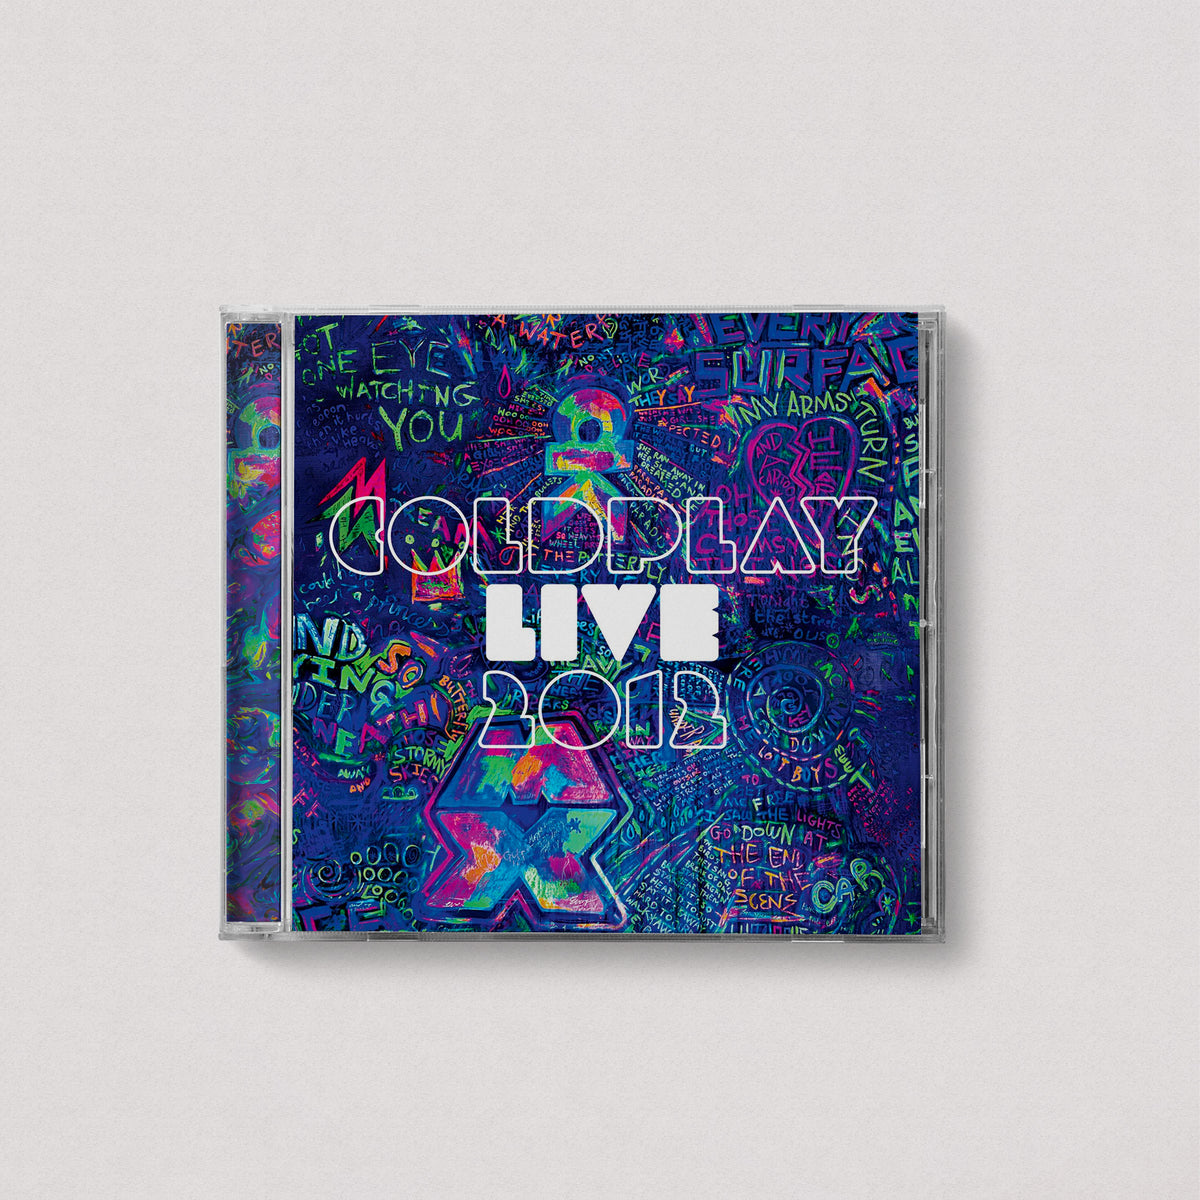 Coldplay - Coldplay Live 2012 (DVD/CD)